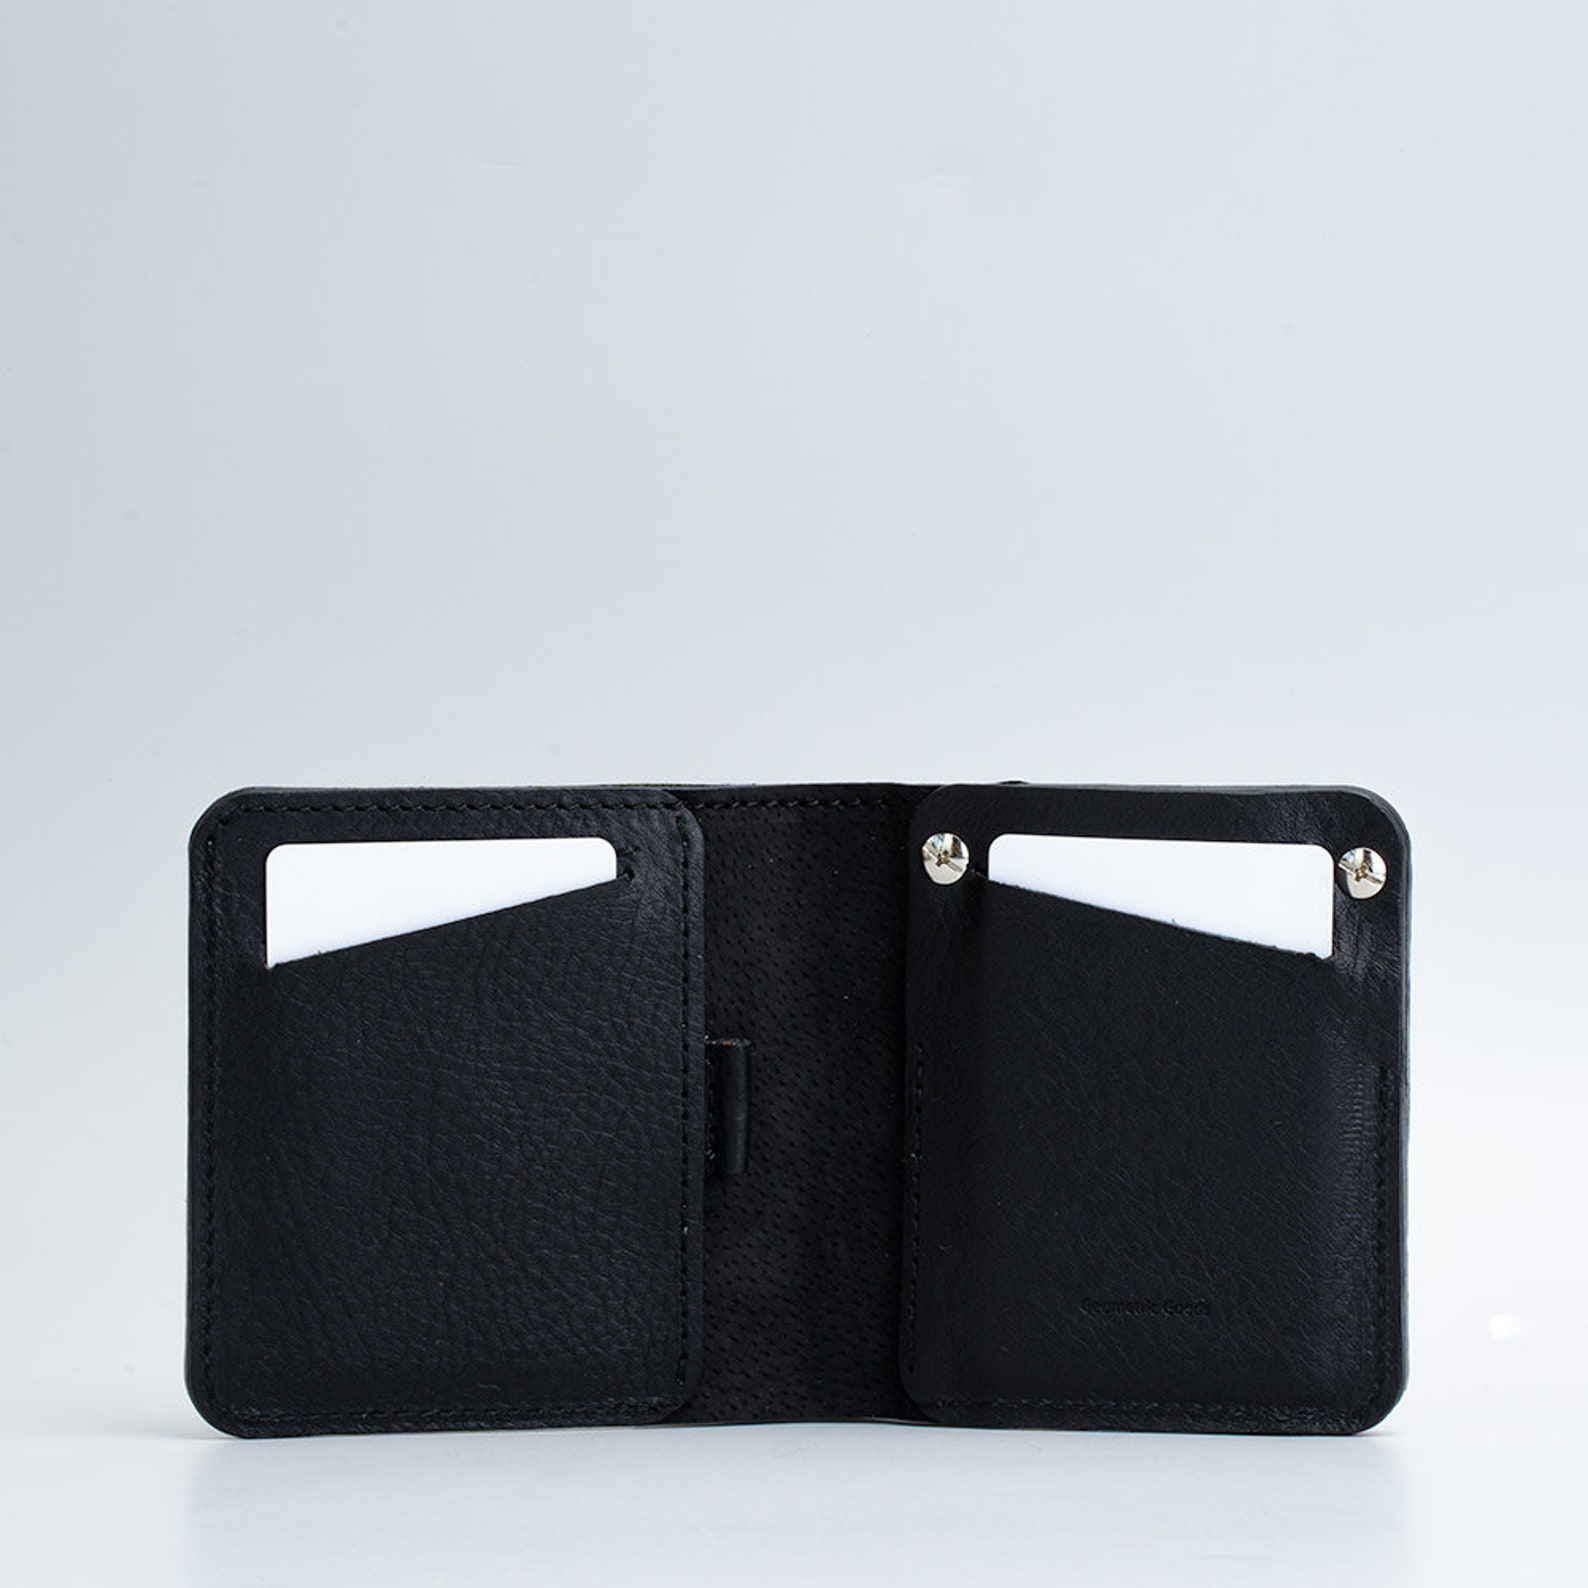 Airtag Billfold Wallet With Hidden Pocket to Fit Inside - Etsy